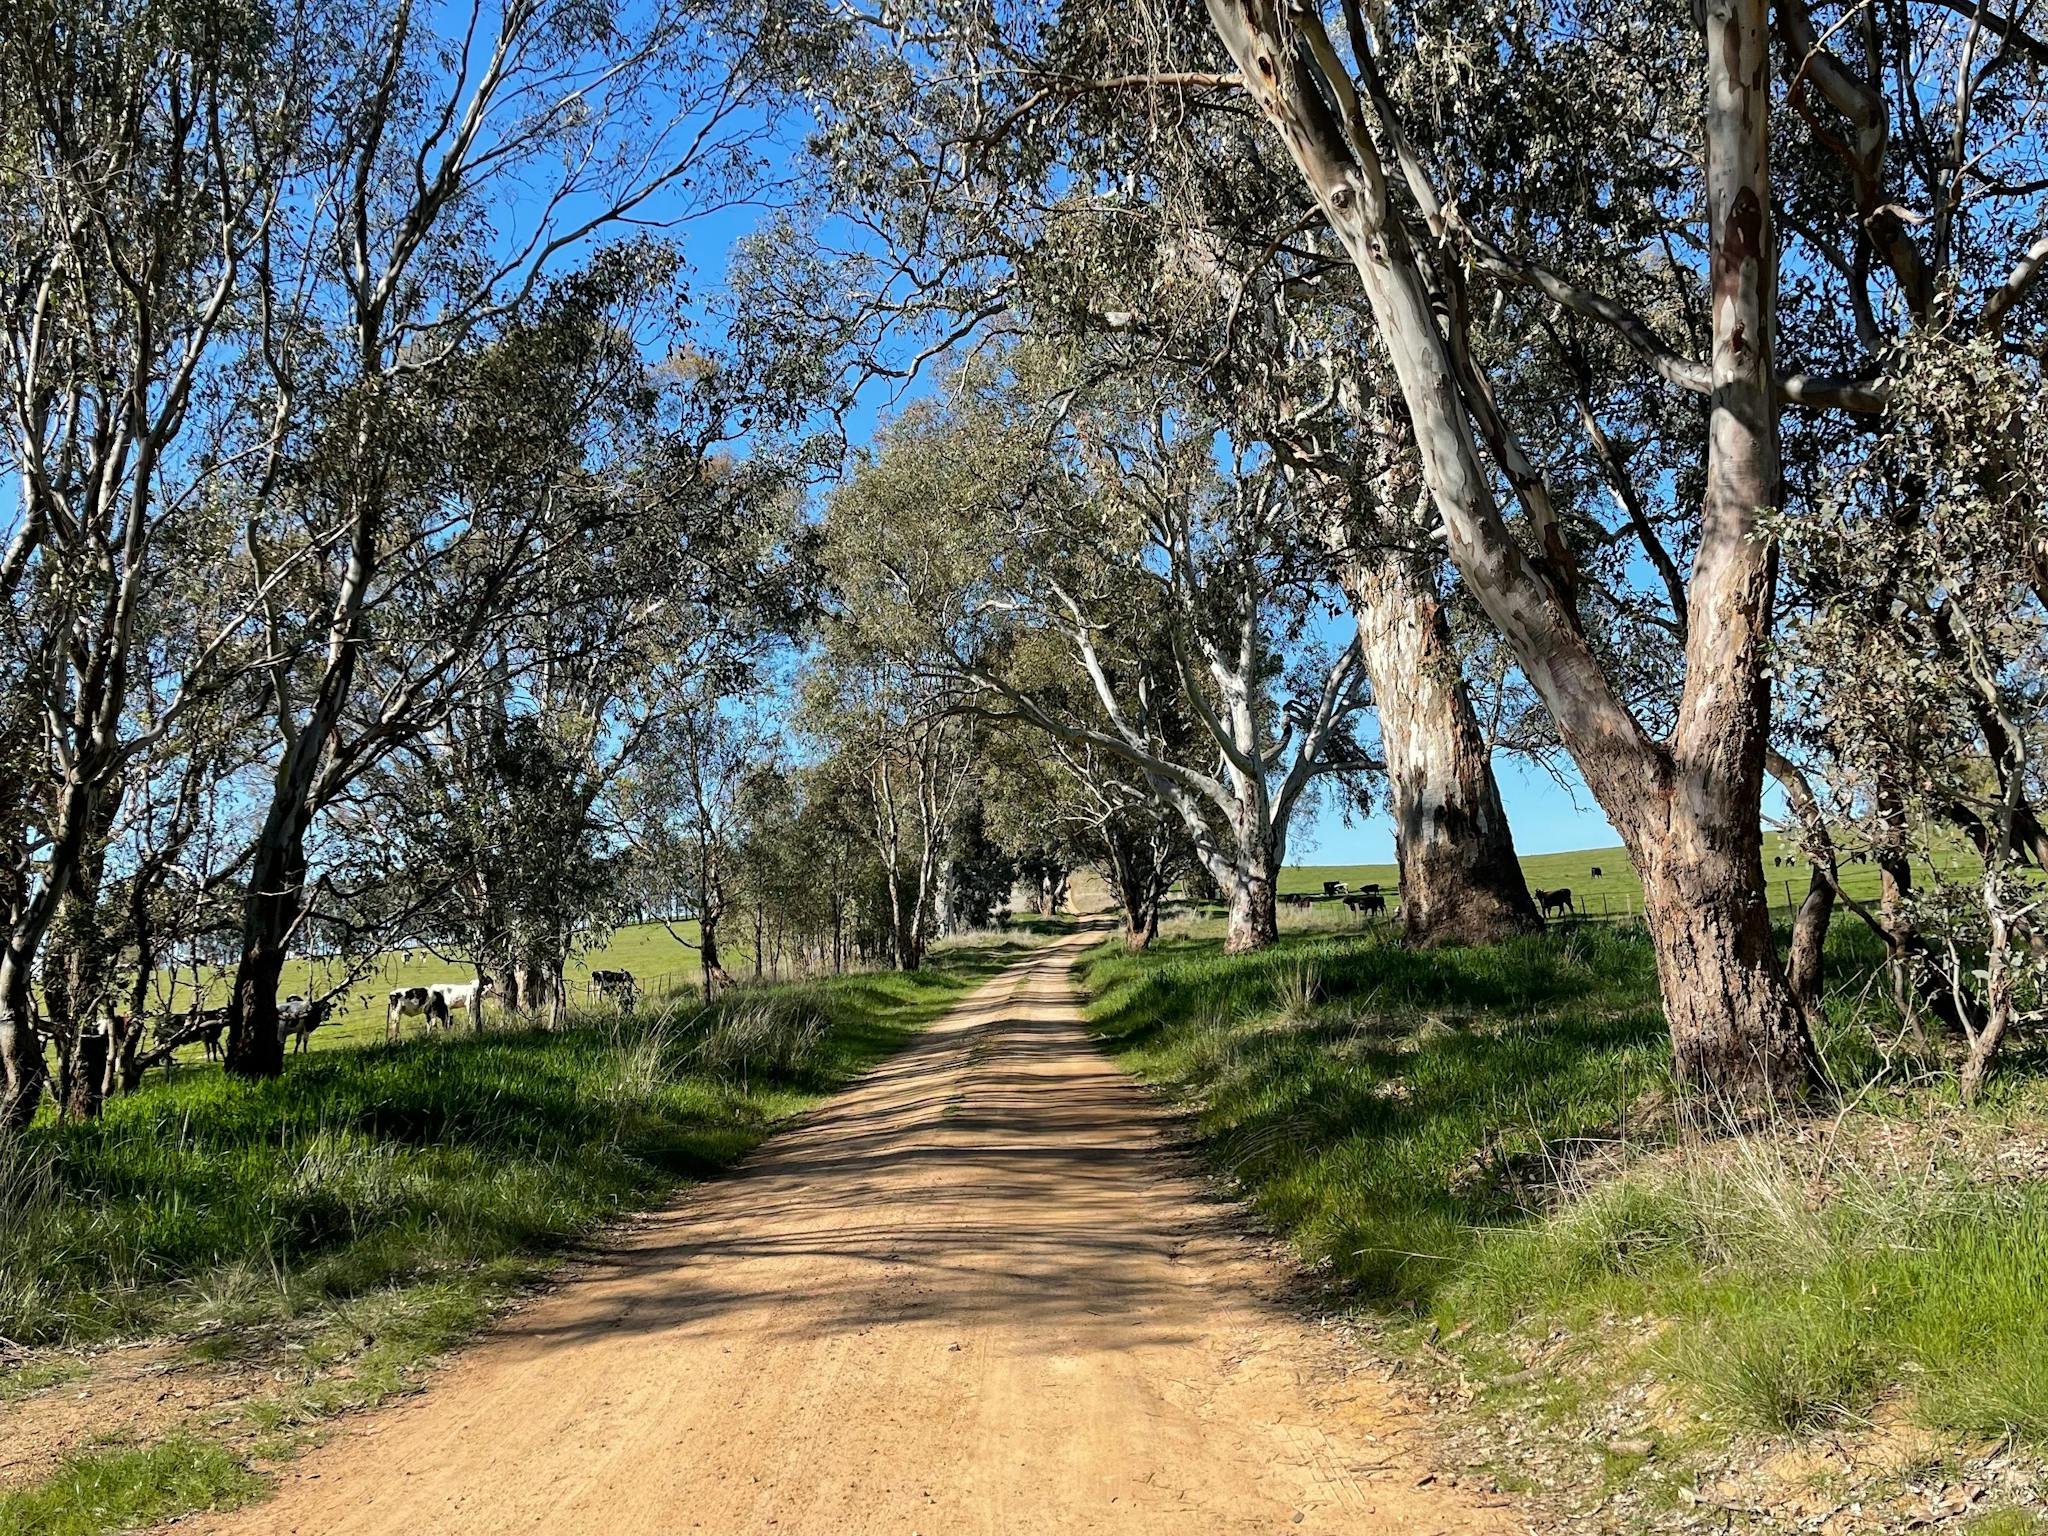 Gravel Road, grass, gum trees, farmland with cattle in the distance